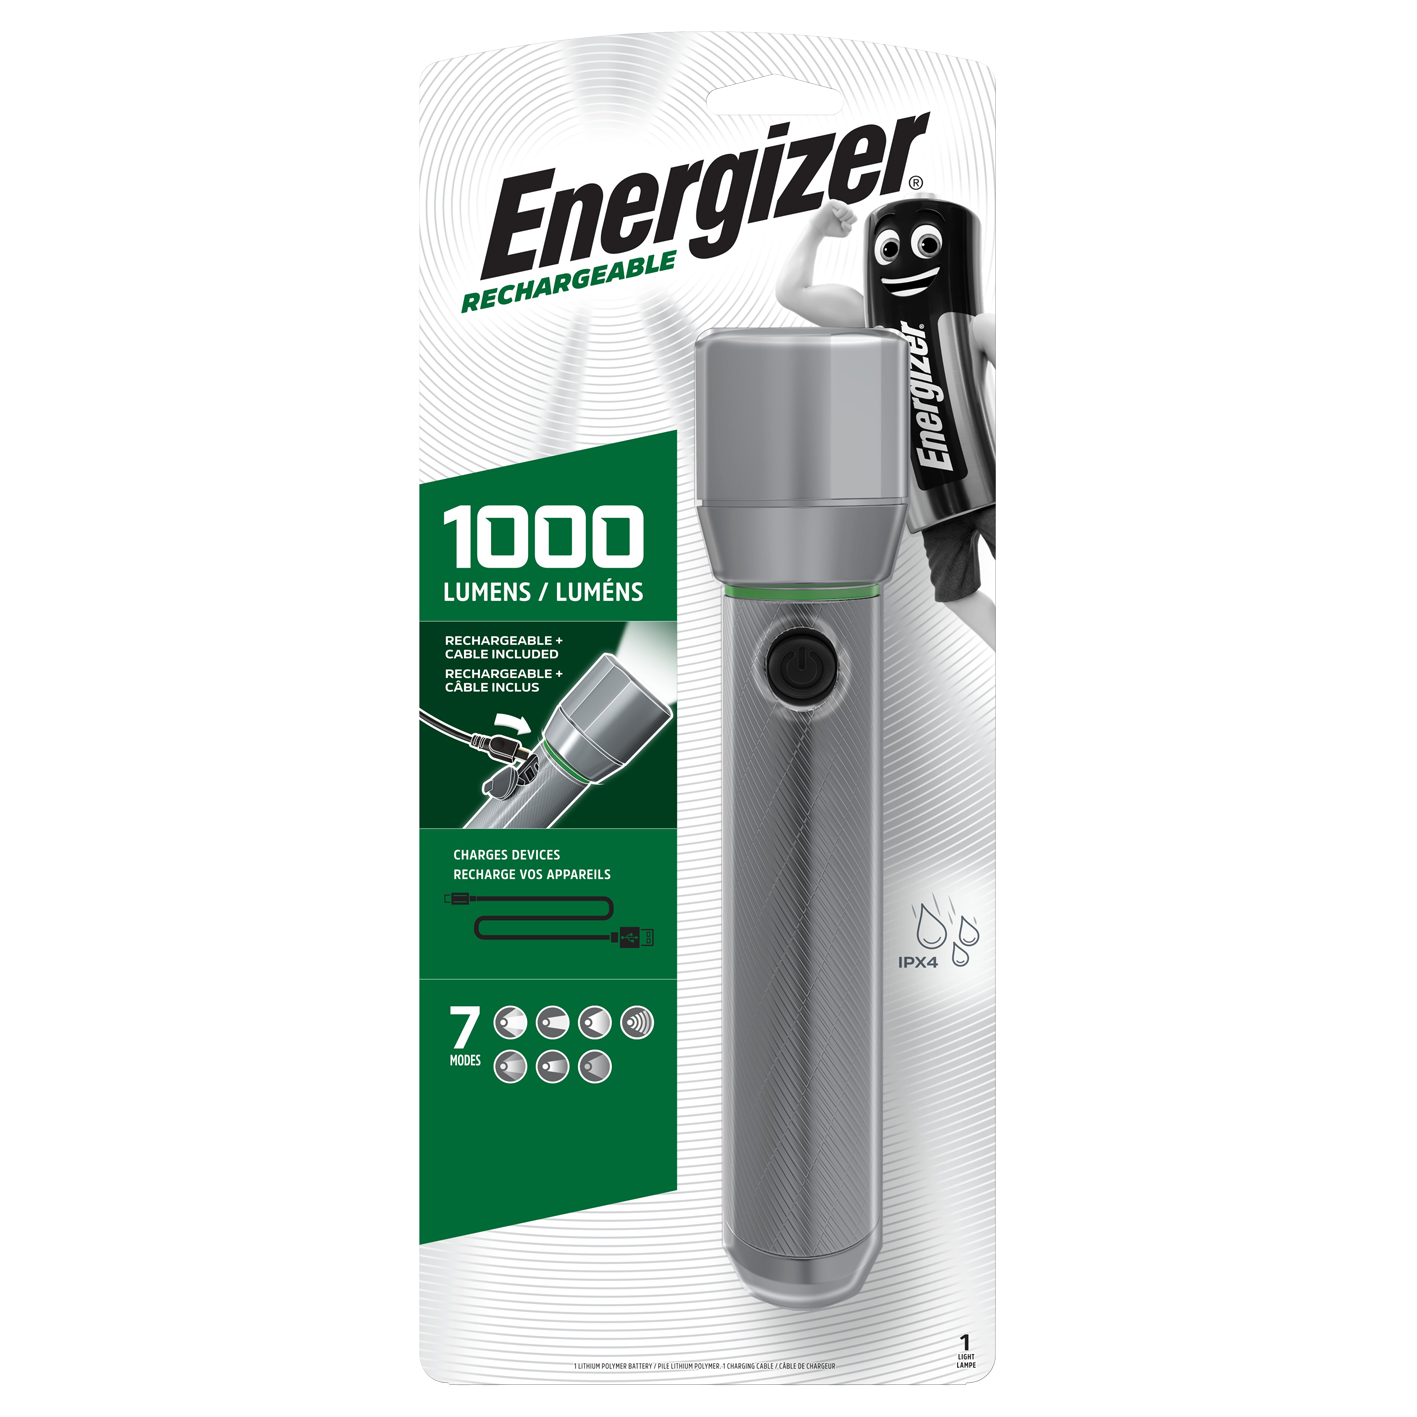 Energizer LED Vision HD Metal 1000 Lumens Rechargeable Torch + USB Port In / Out